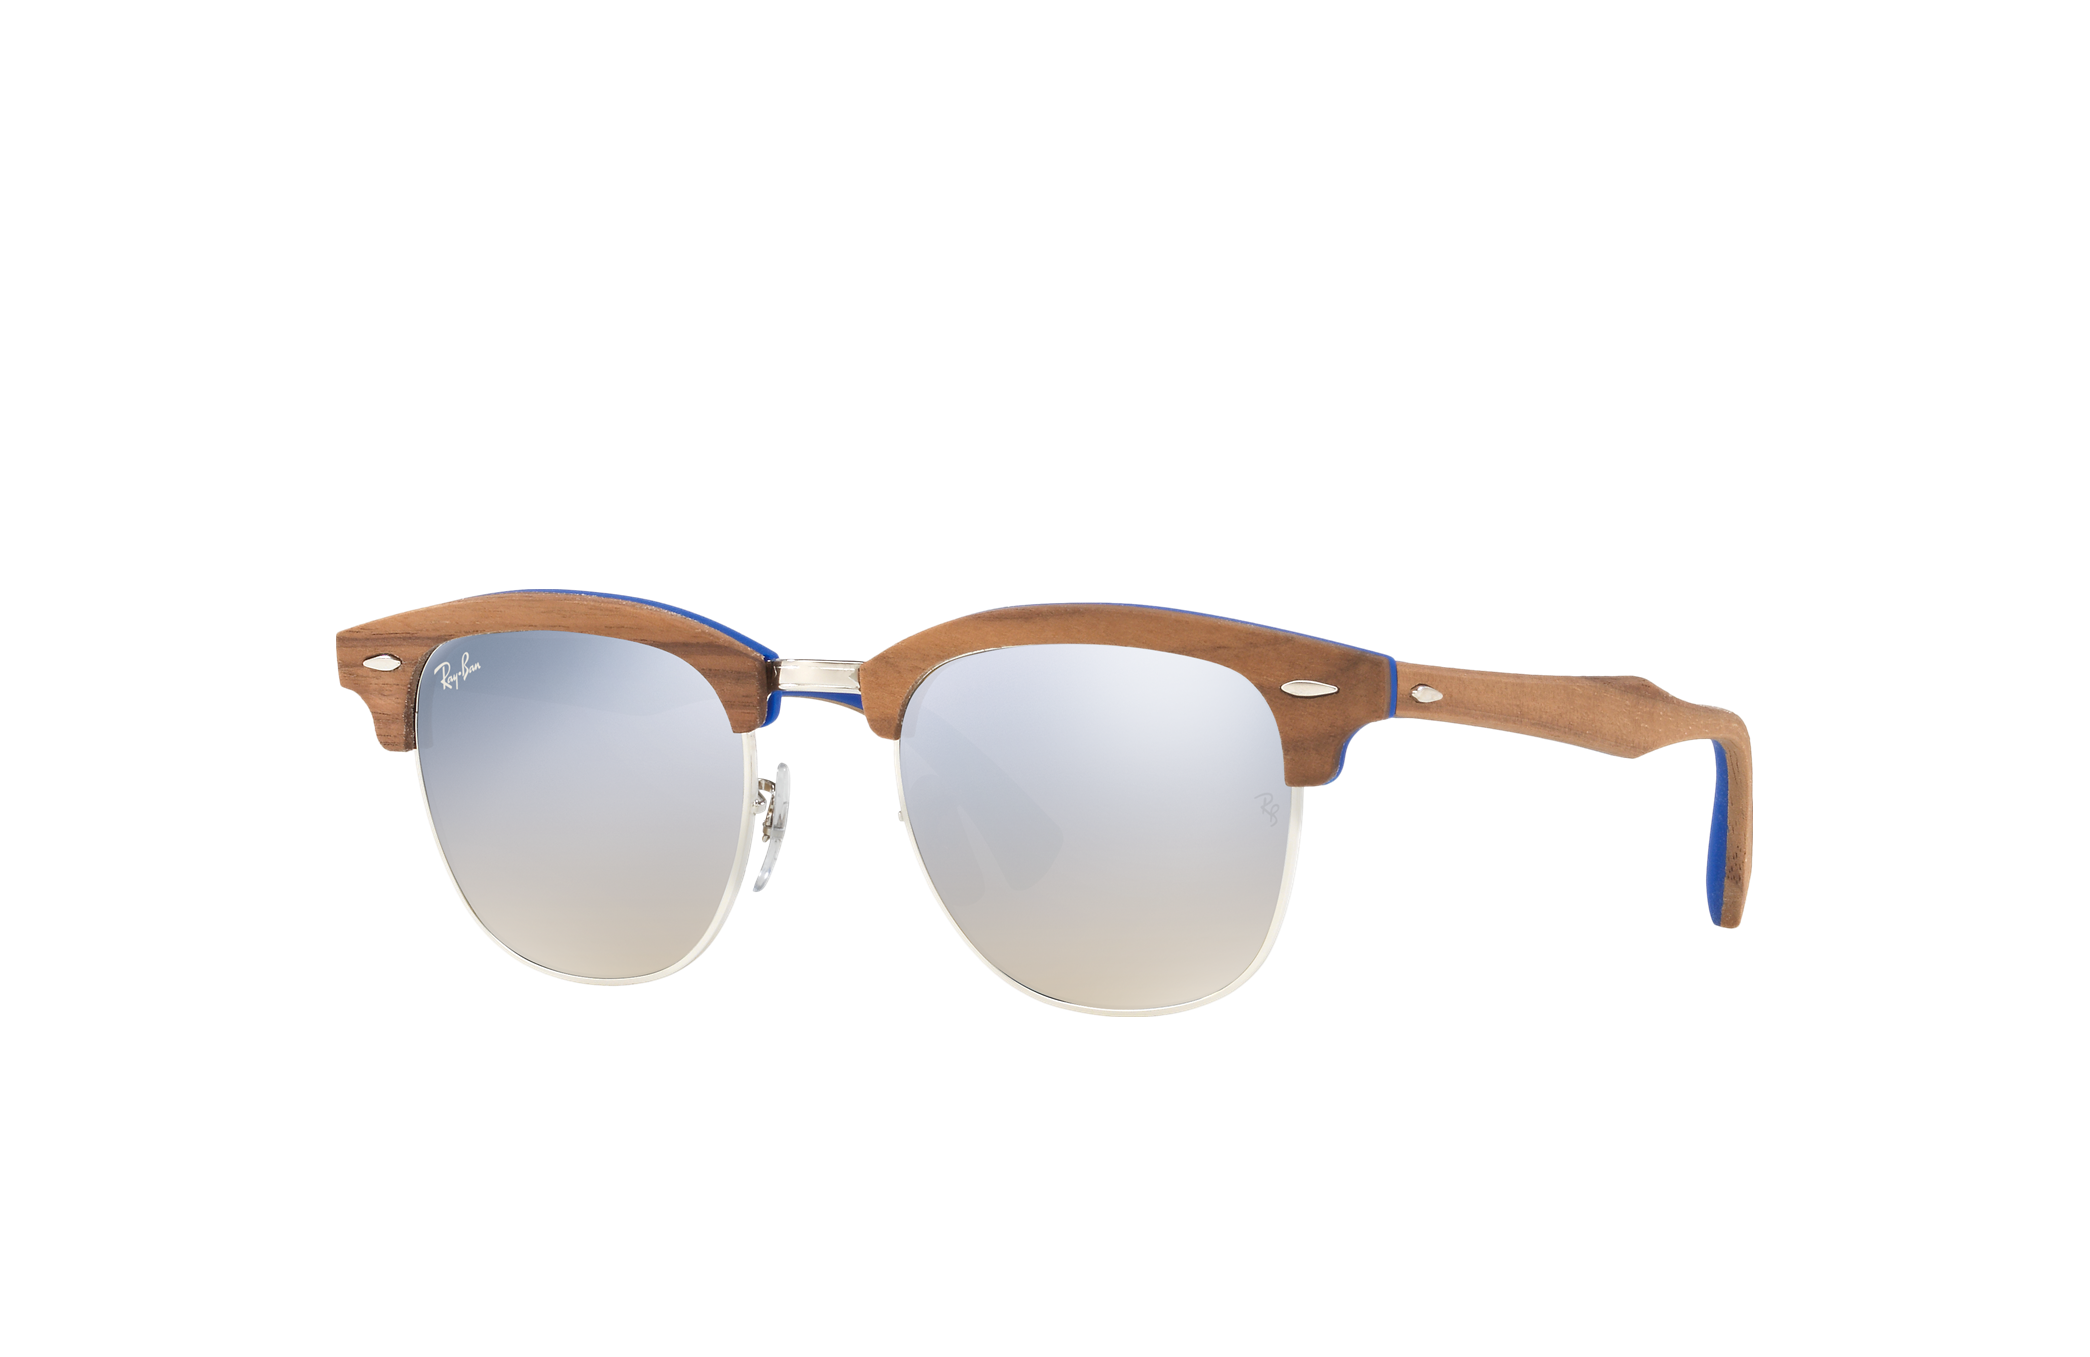 ray ban sunglasses wooden frame